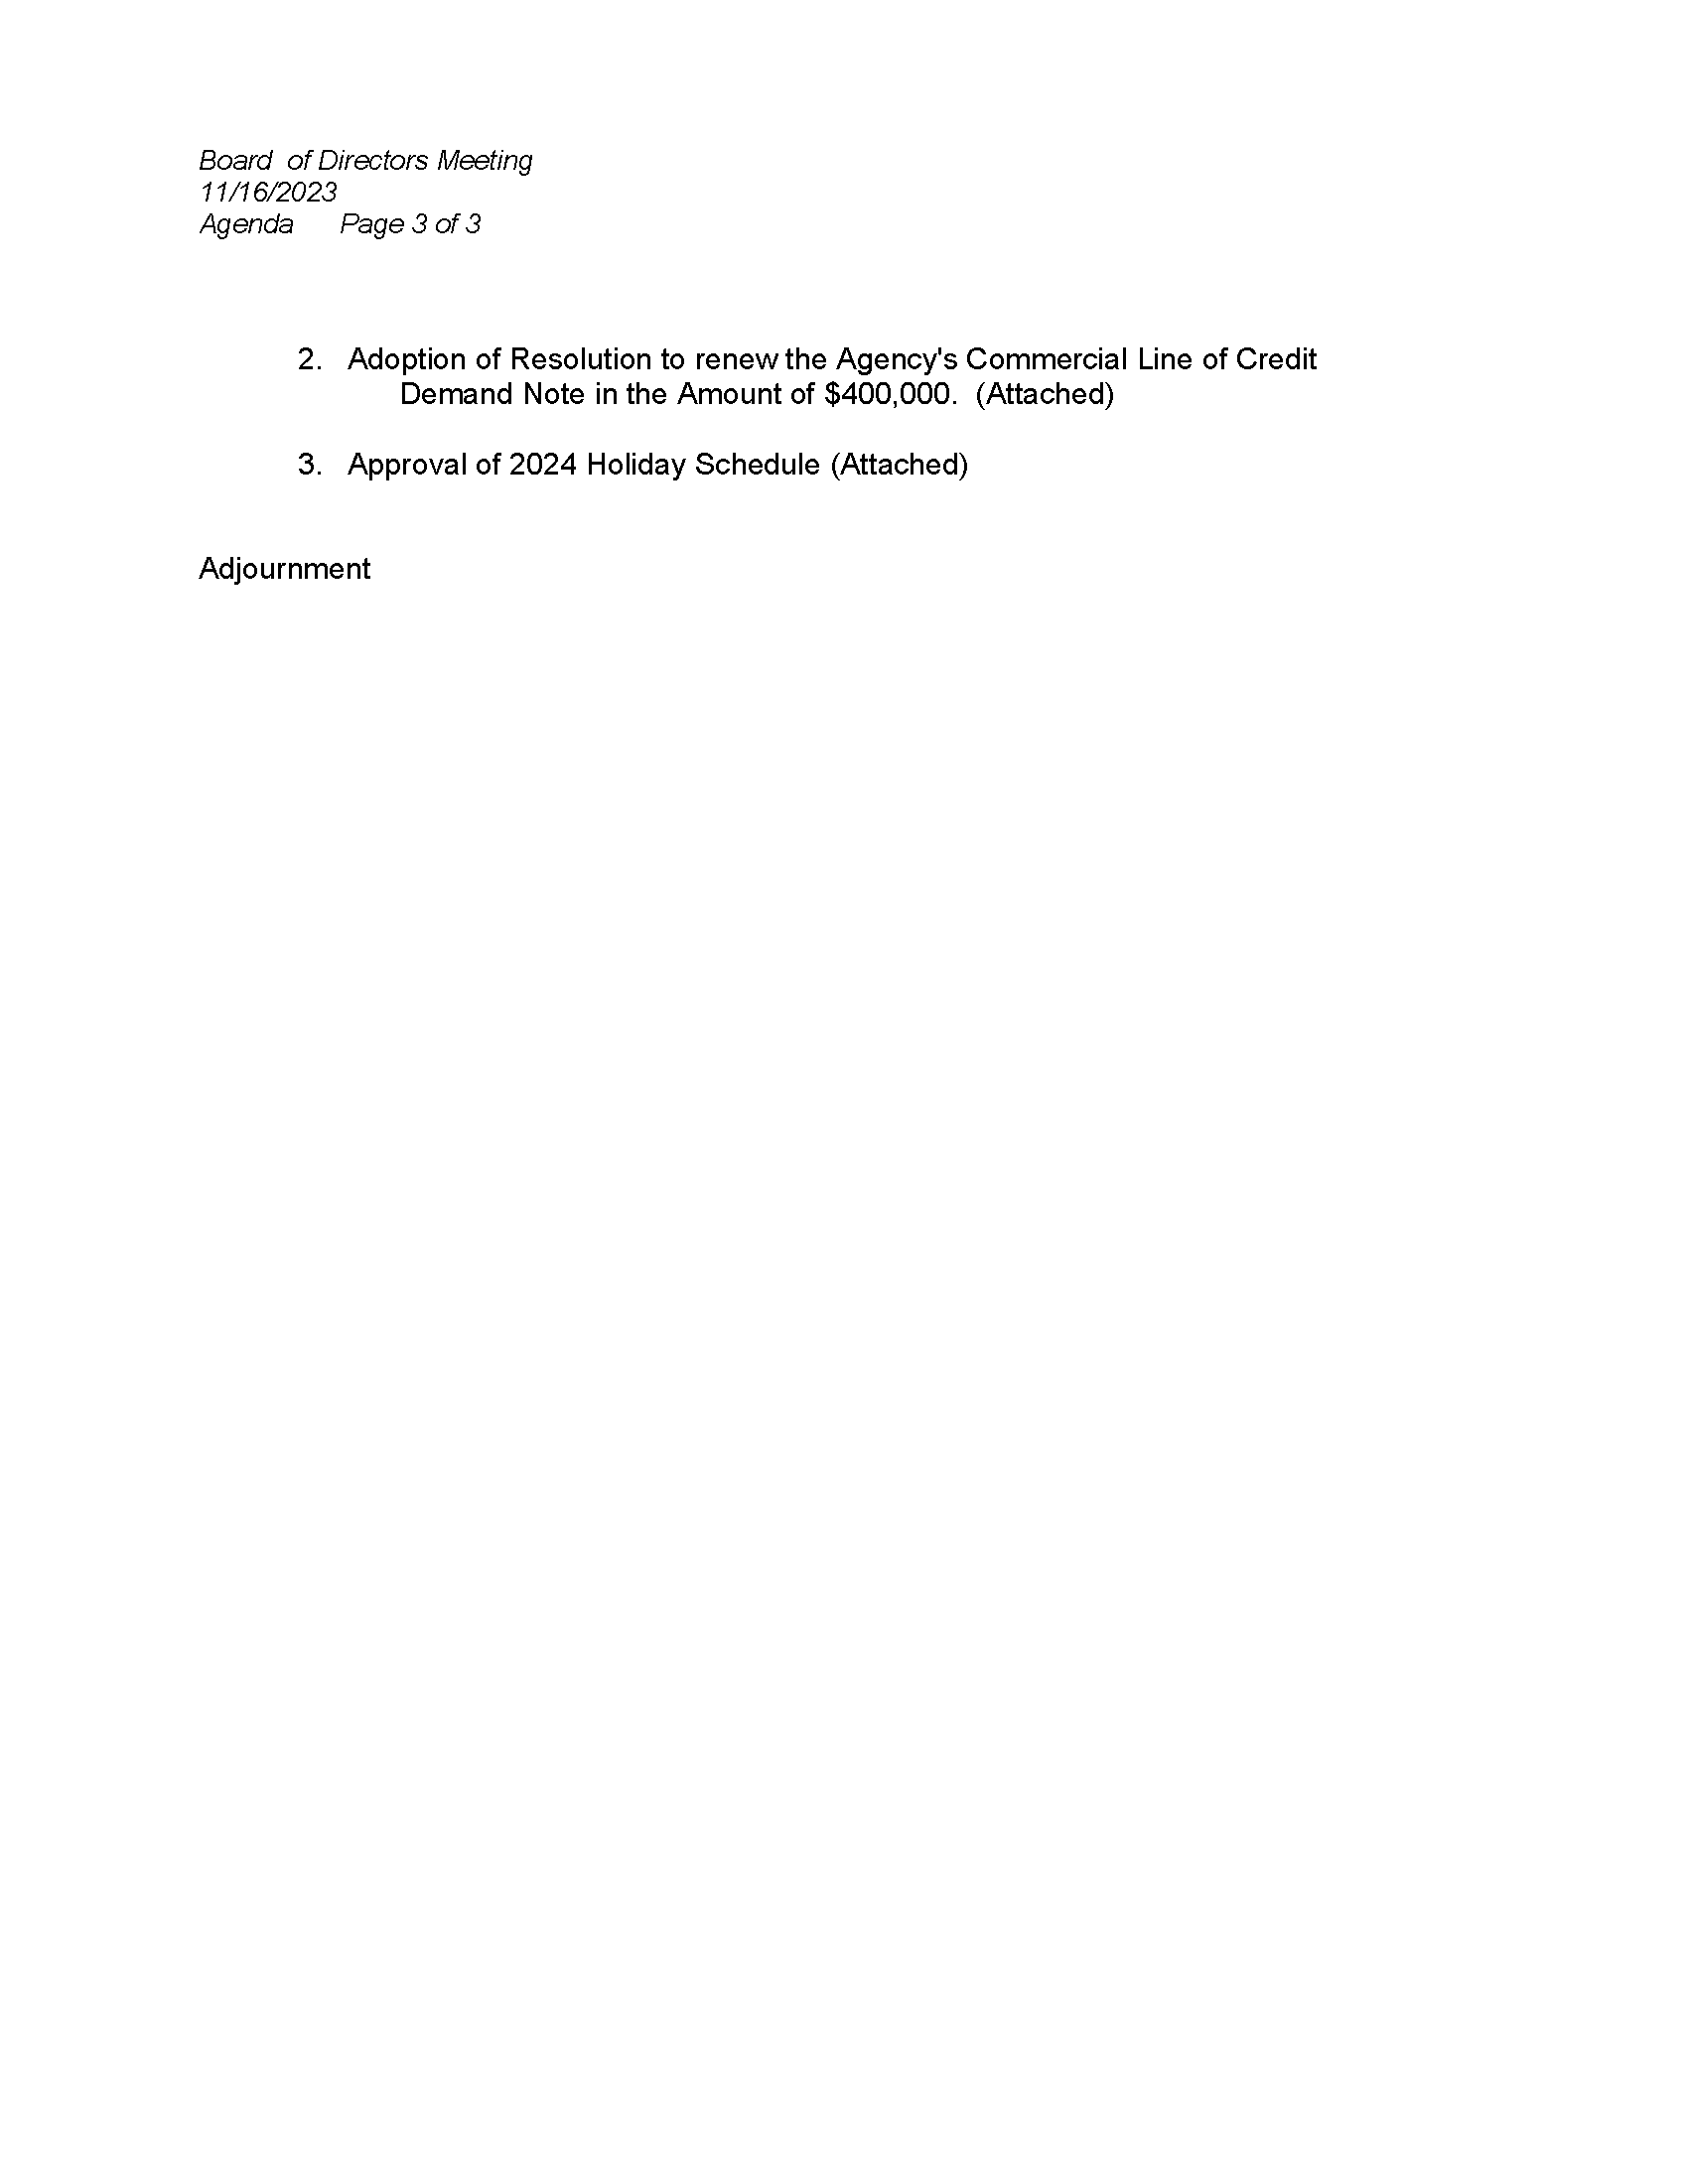 11_16_2023_Board_of_Directors_Annual_Meeting_Agenda_Page_3.png